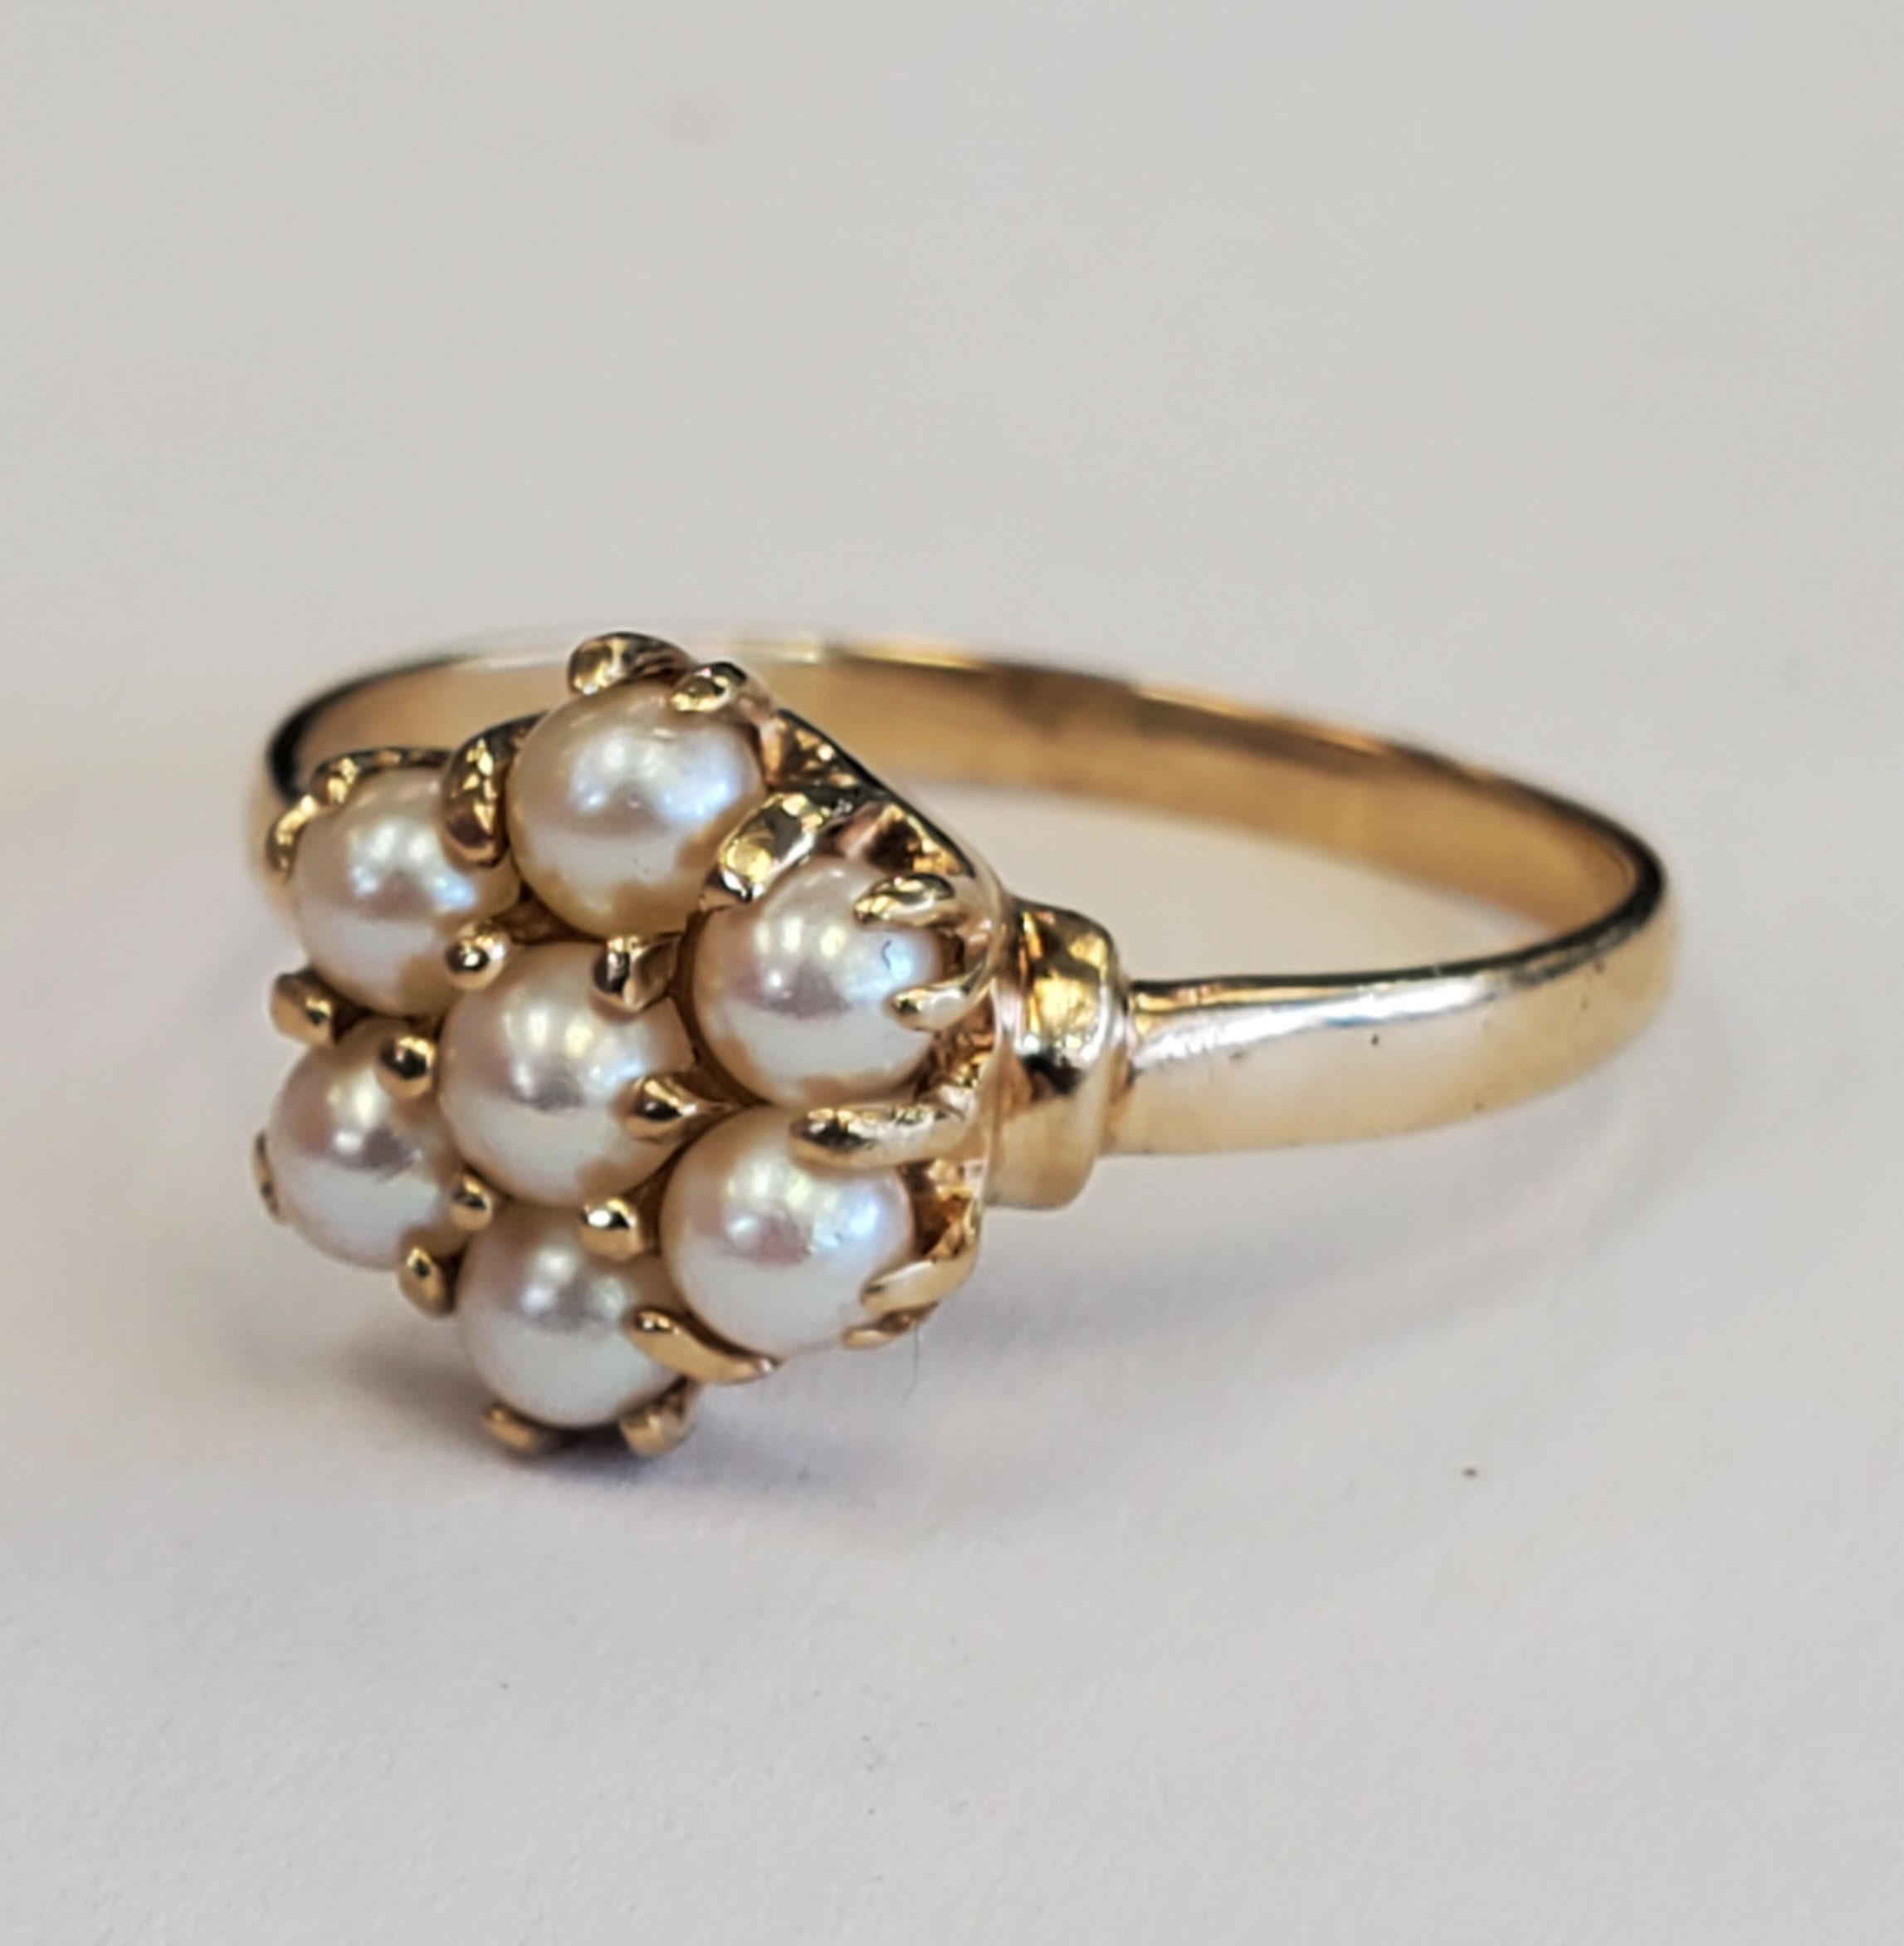 Product Image for Antique seed pearl cluster Victorian ring 14k yellow gold size 7